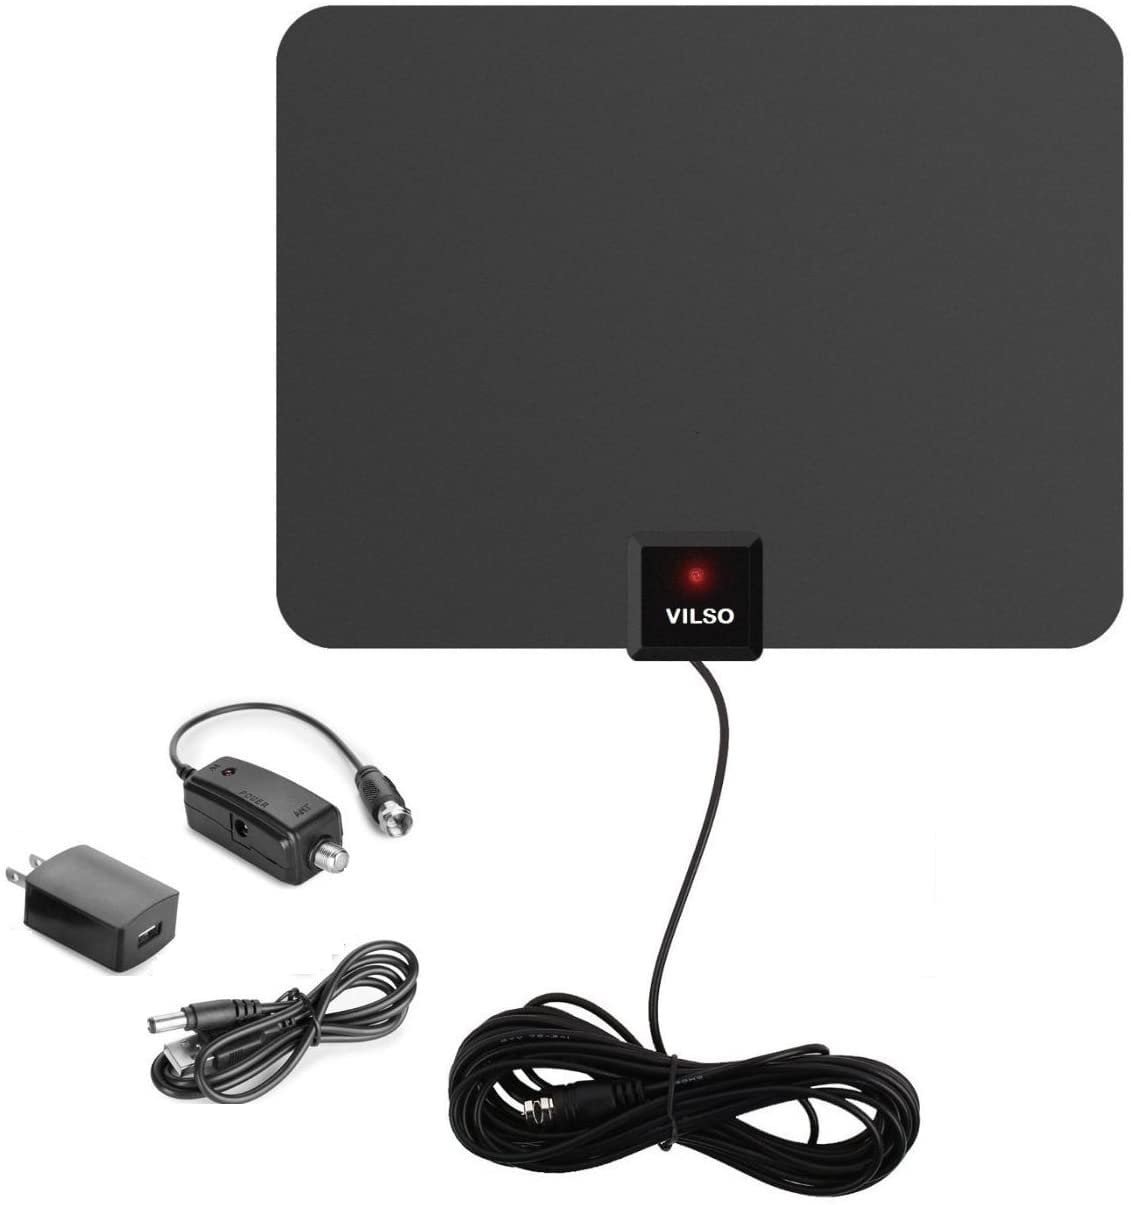 50-100Mile Range HDTV Clear View Antenna Digital Flat 1080P Amplified Booster 